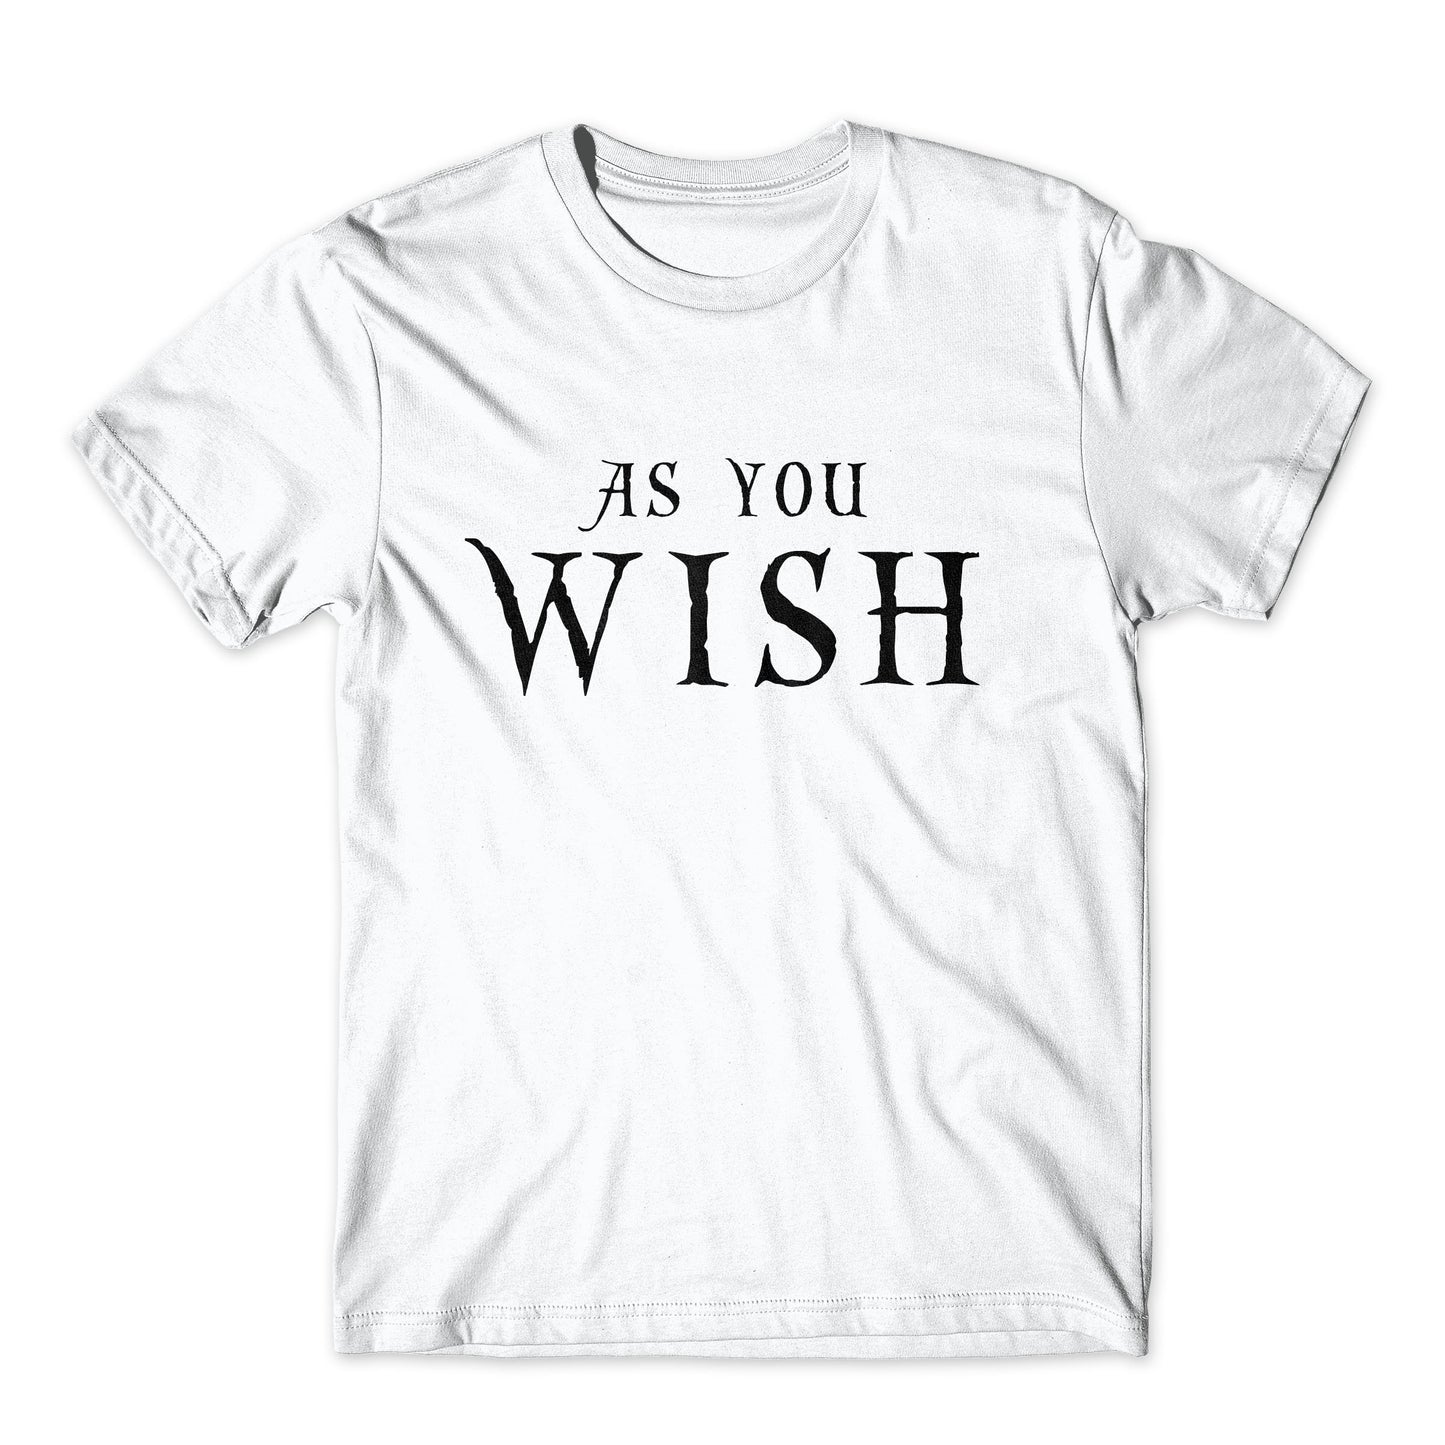 As You Wish T-Shirt. On Black, White, or Gray Soft Cotton  Premium Shirt. Princess Bride Westley and Buttercup Inspired Tee. Comfy!